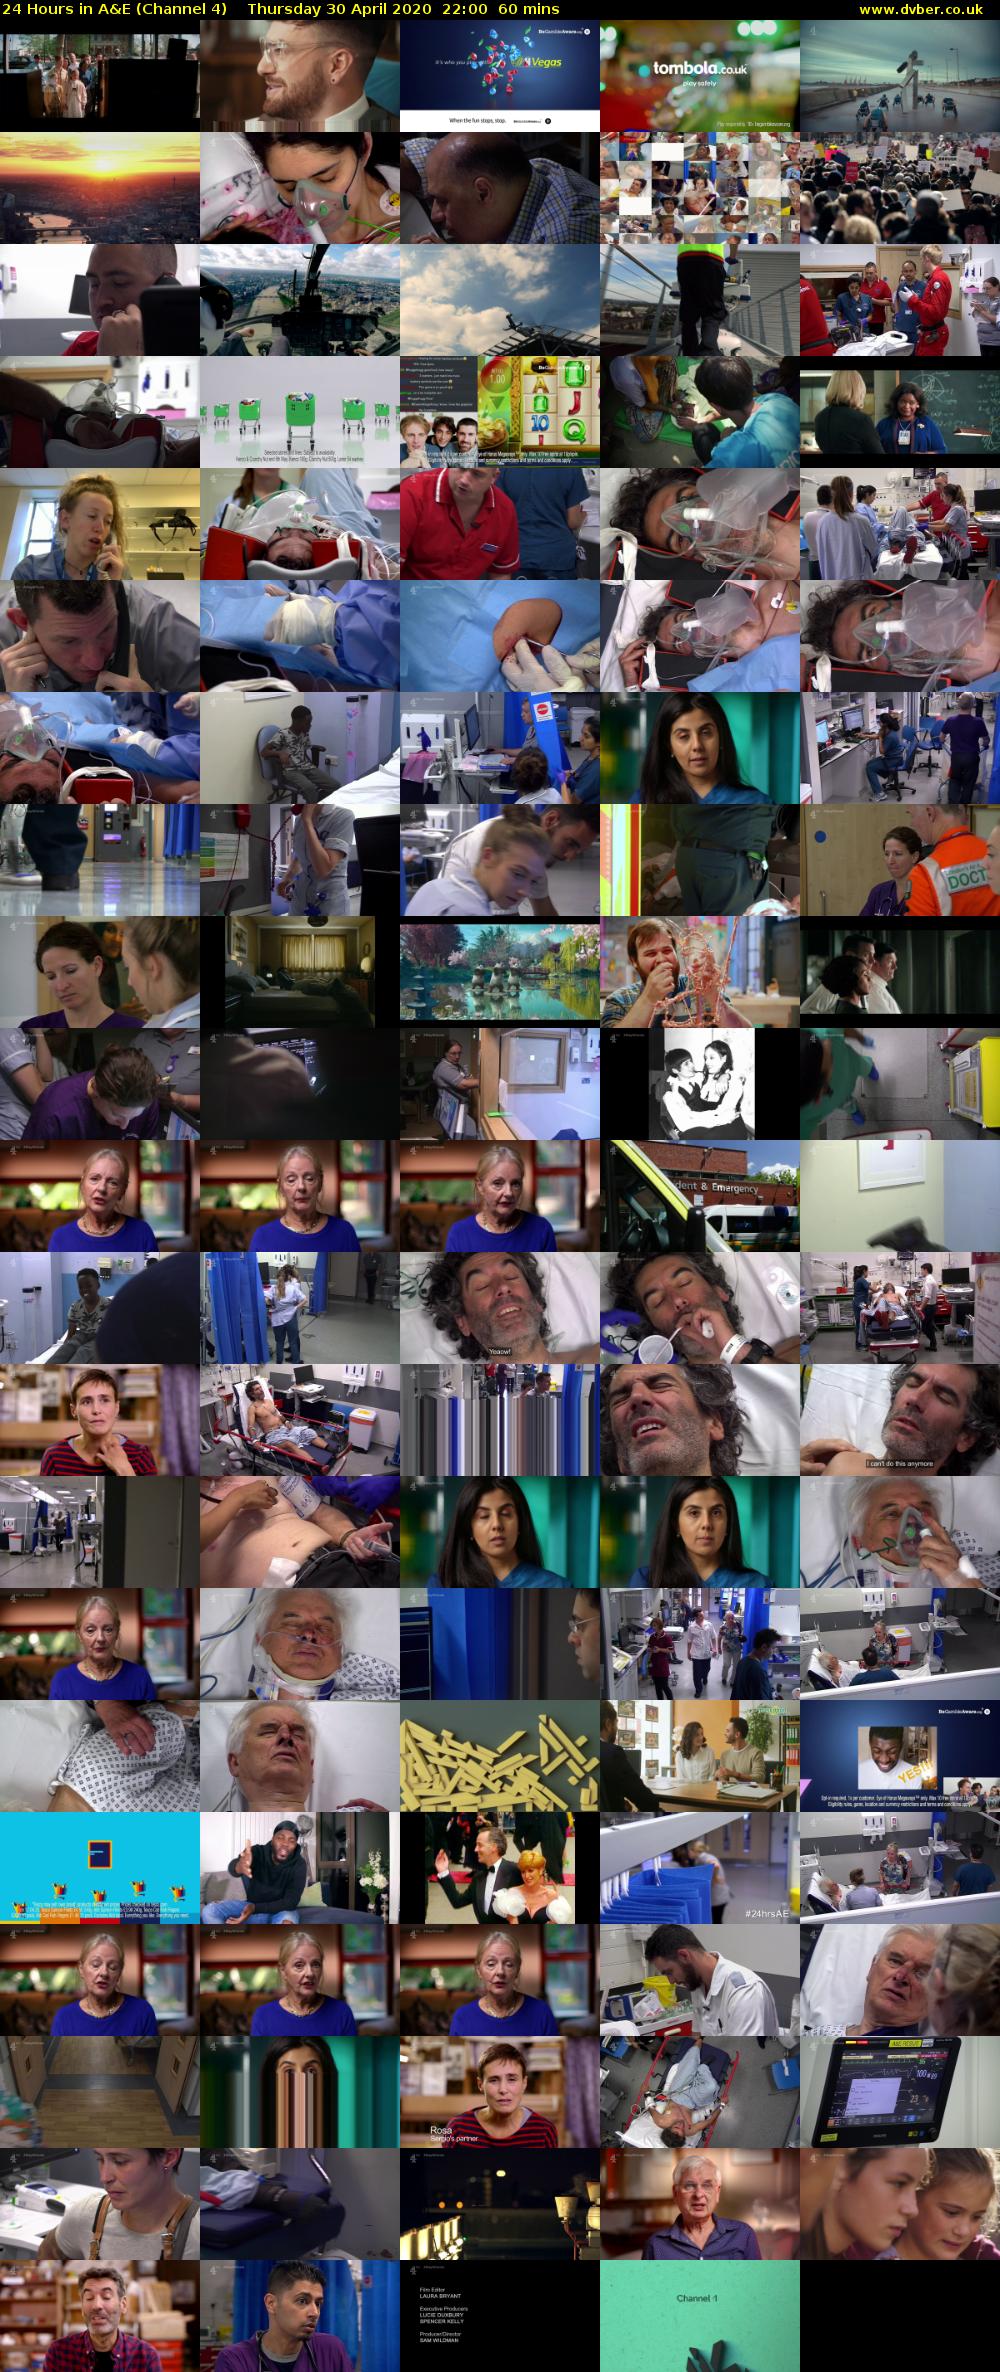 24 Hours in A&E (Channel 4) Thursday 30 April 2020 22:00 - 23:00